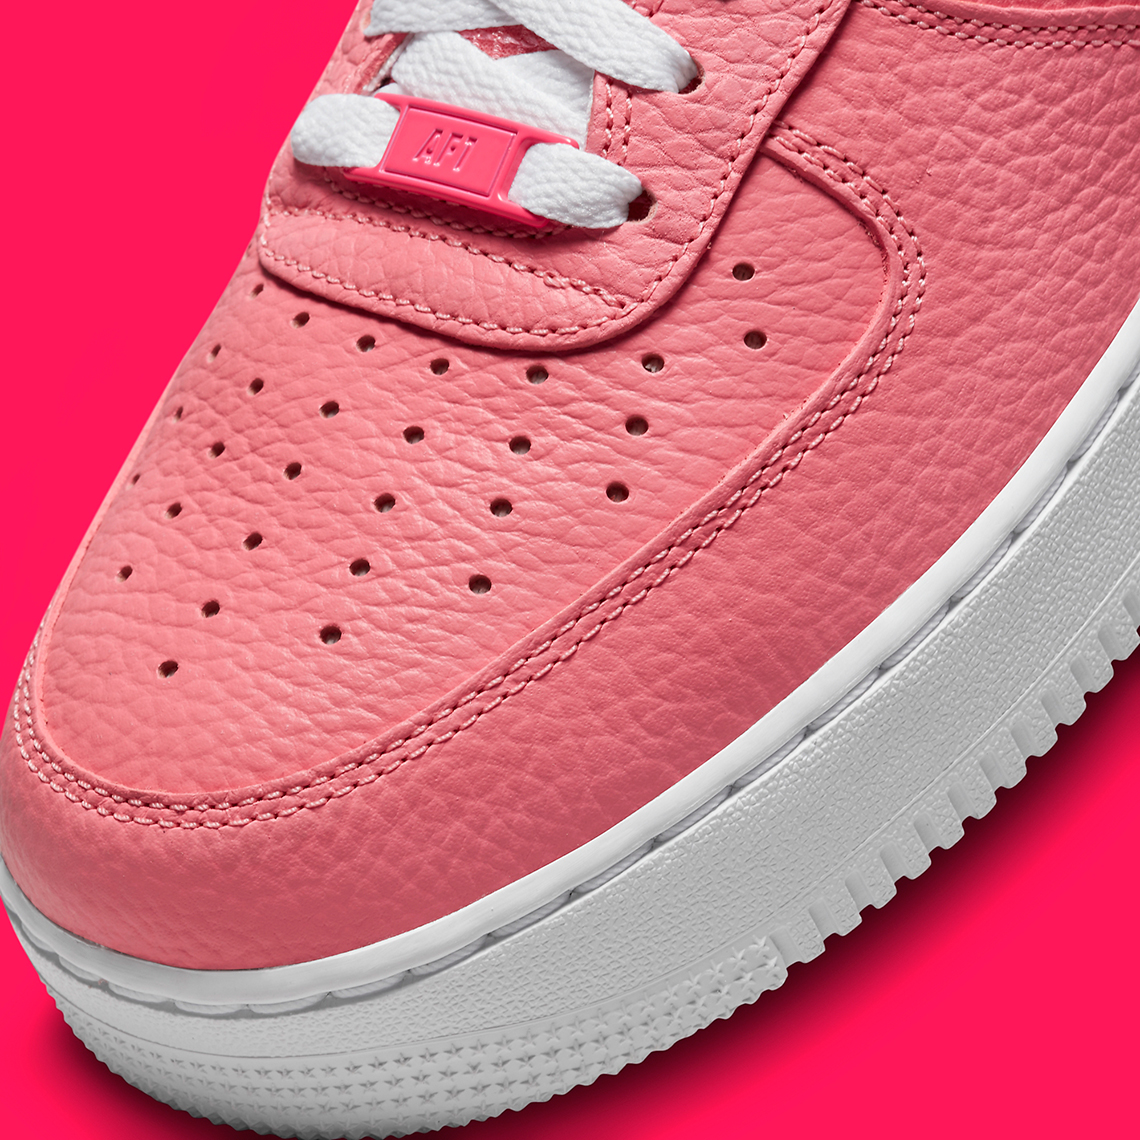 nike-air-force-1-low-pink-tumbled-leather-DZ4861-600-7.jpg